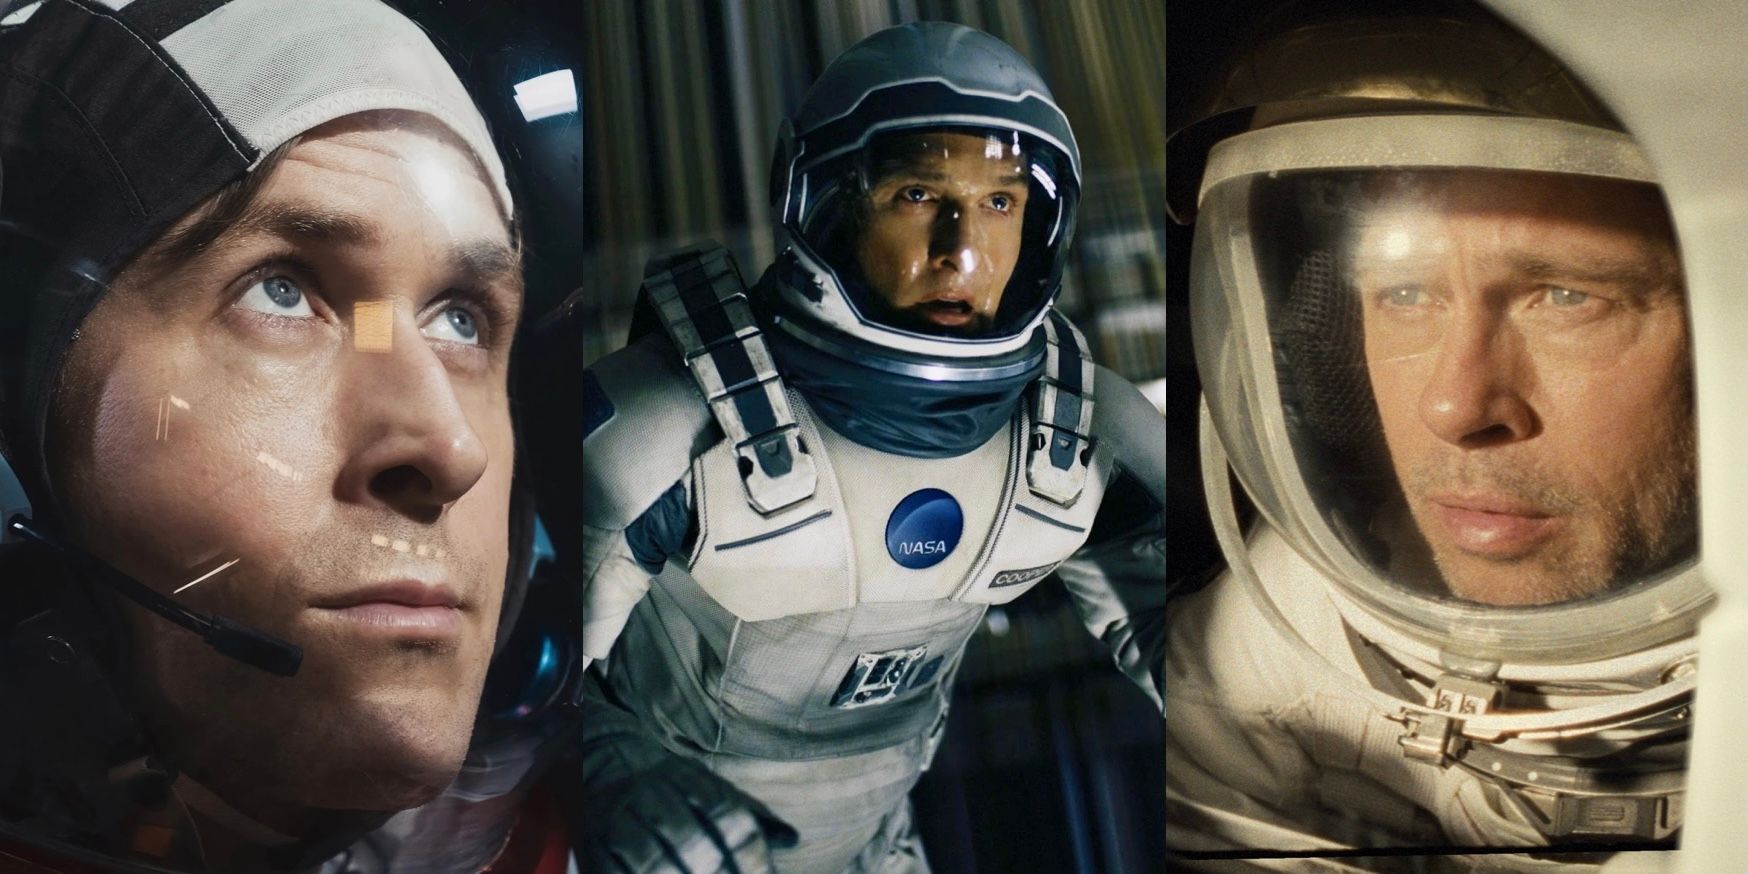 SPACE MOVIES FROM THE 2010S FEATURE IMAGE - FIRST MAN, INTERSTELLAR, AD ASTRA